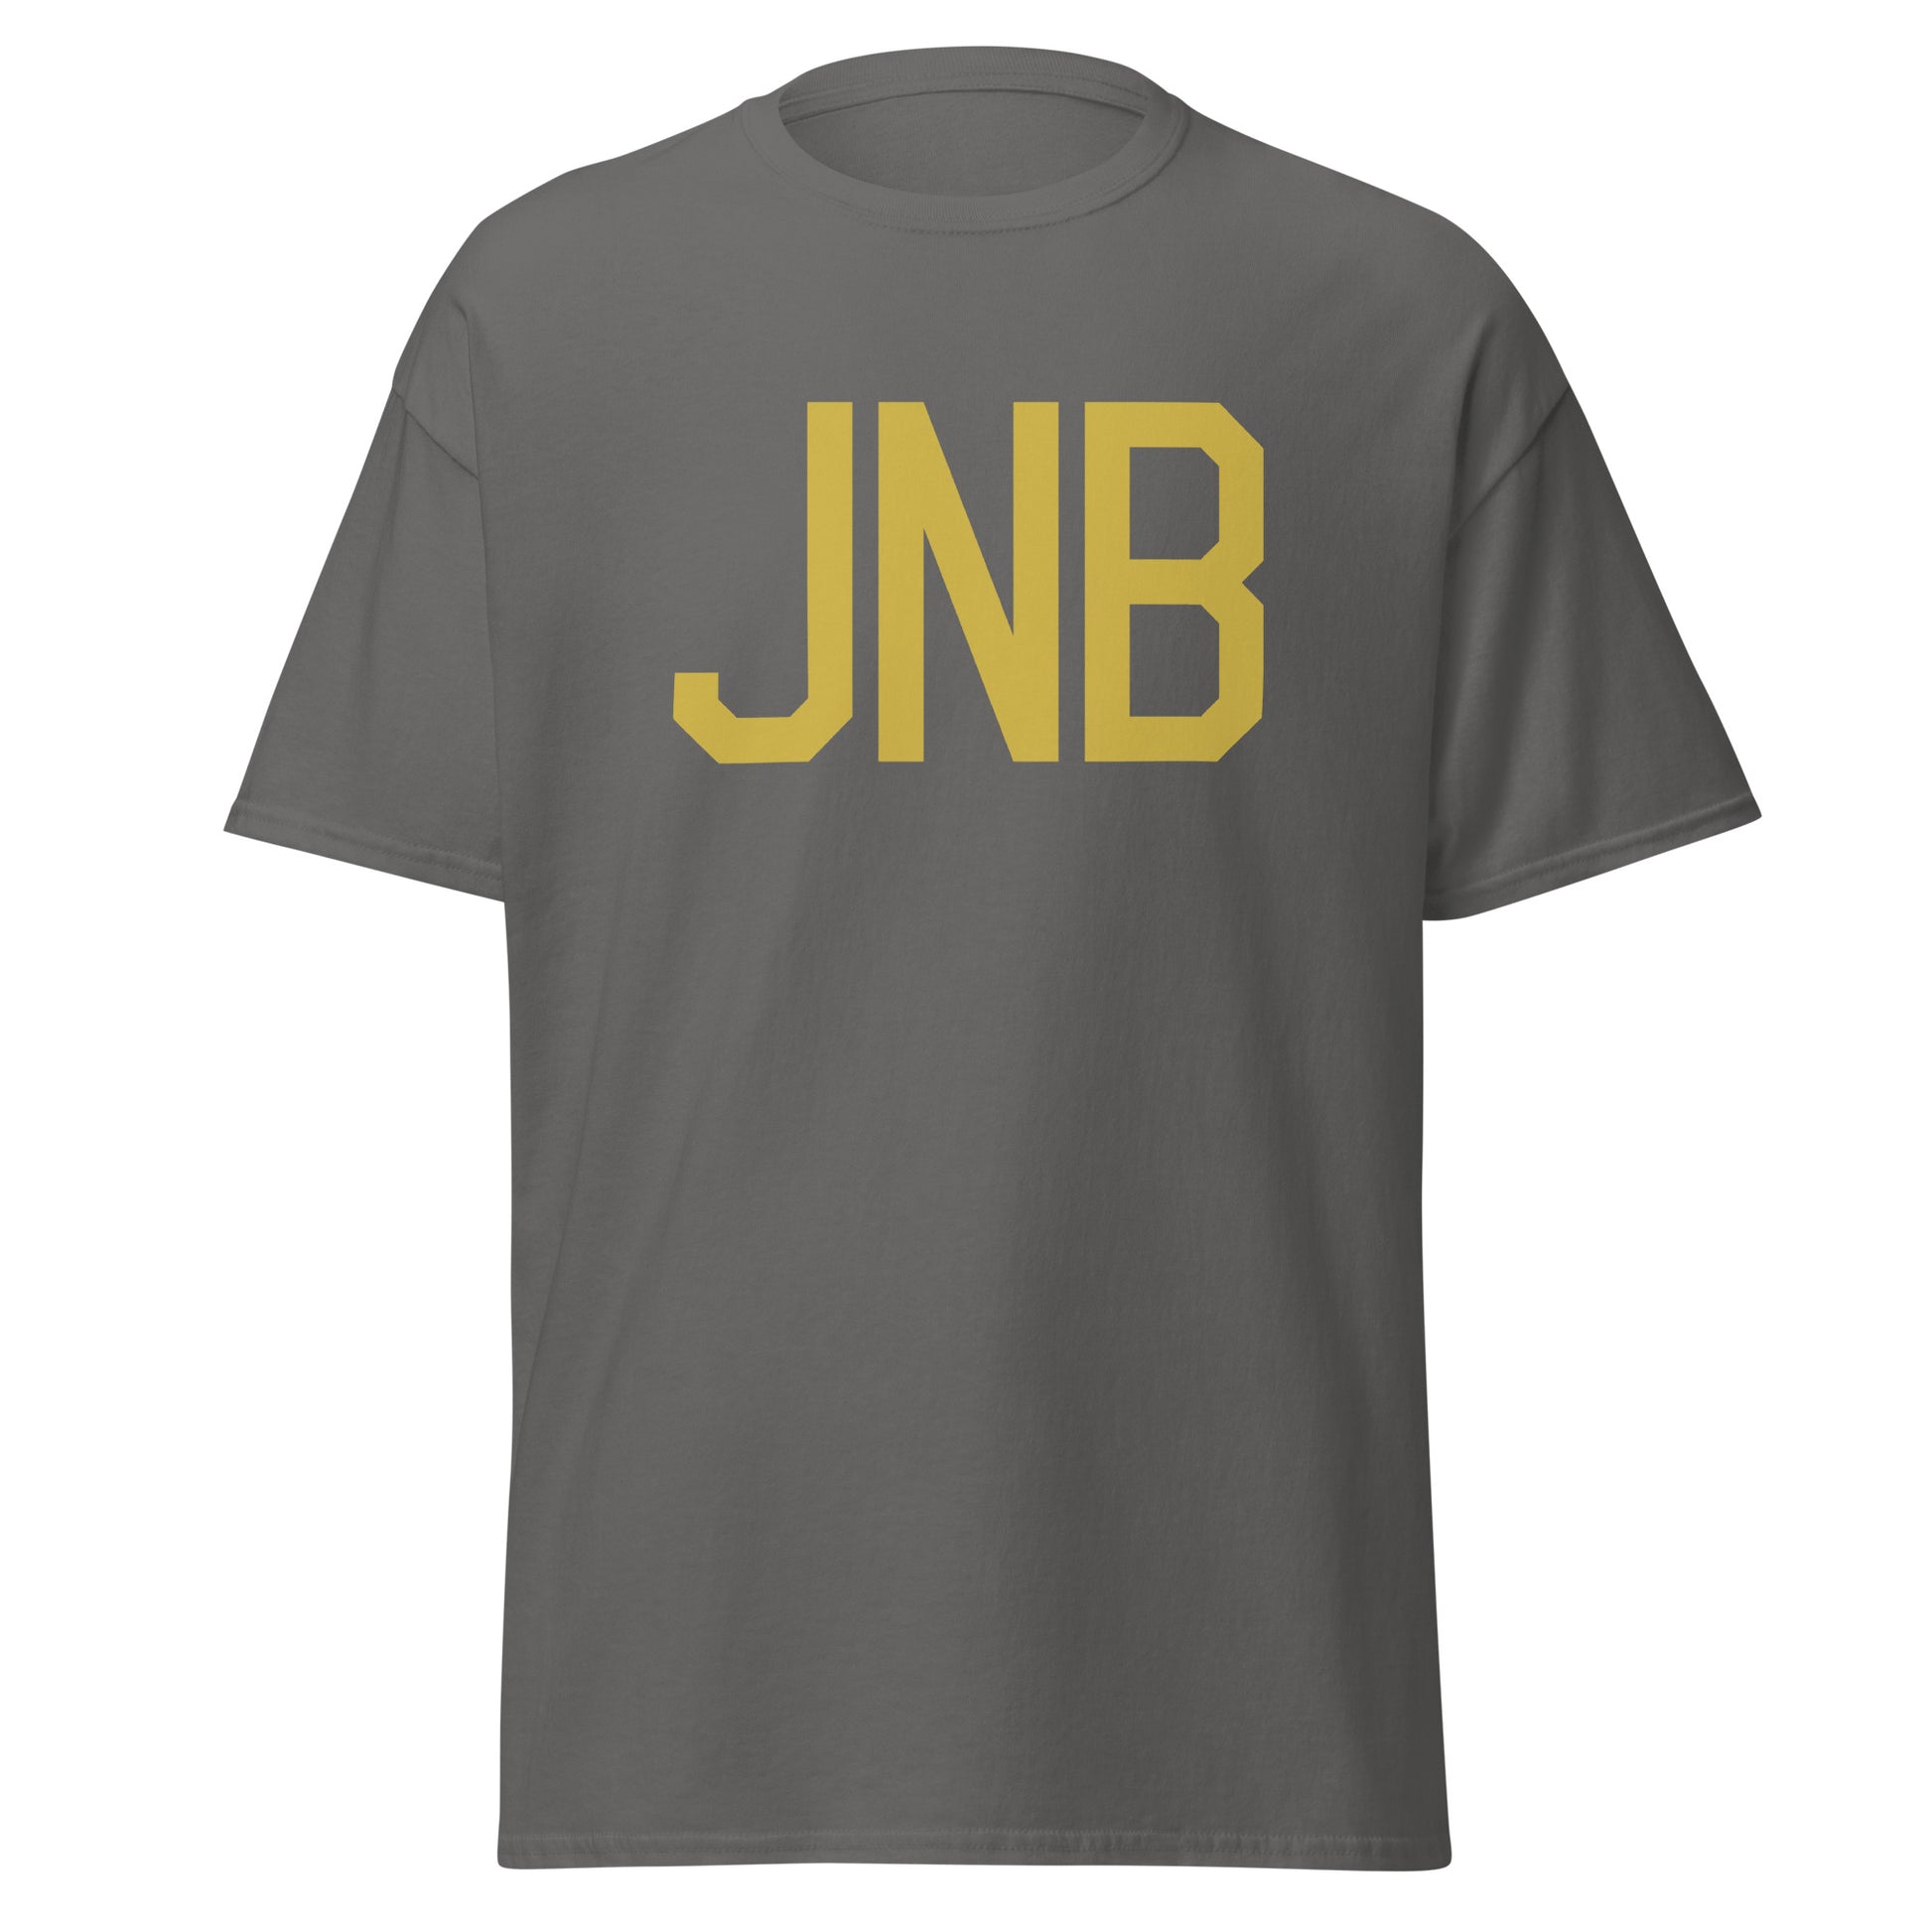 Aviation Enthusiast Men's Tee - Old Gold Graphic • JNB Johannesburg • YHM Designs - Image 05